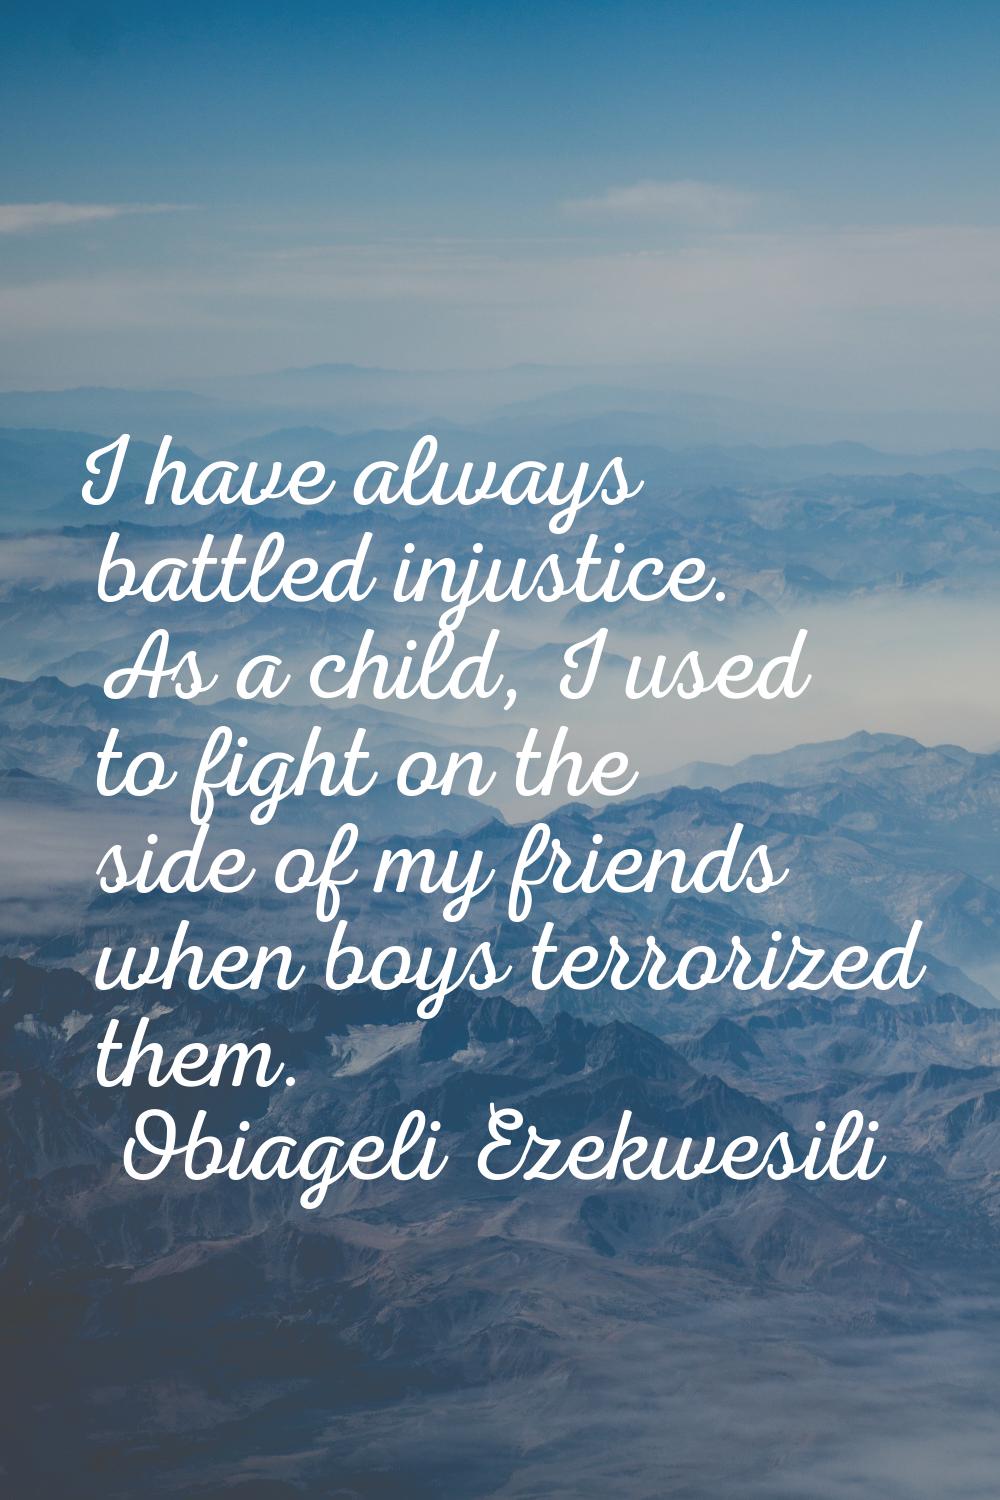 I have always battled injustice. As a child, I used to fight on the side of my friends when boys te